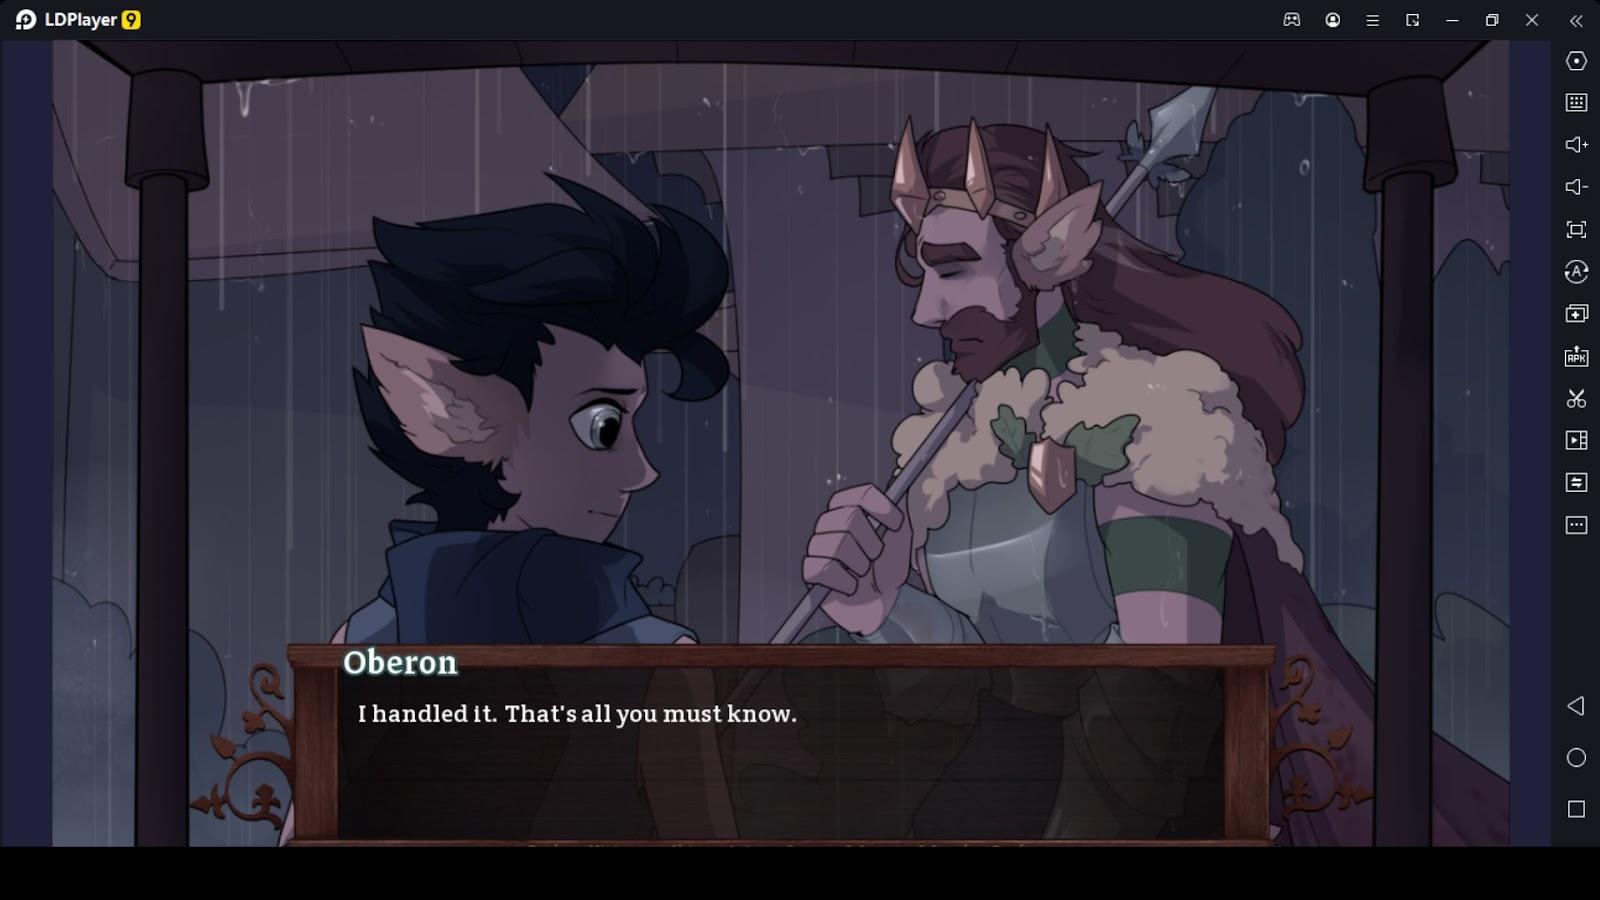 Gay Furry Porn Games - Gay Furry Porn Games March 2023 - Take a Step into LGBTQ Community-Game  Guides-LDPlayer